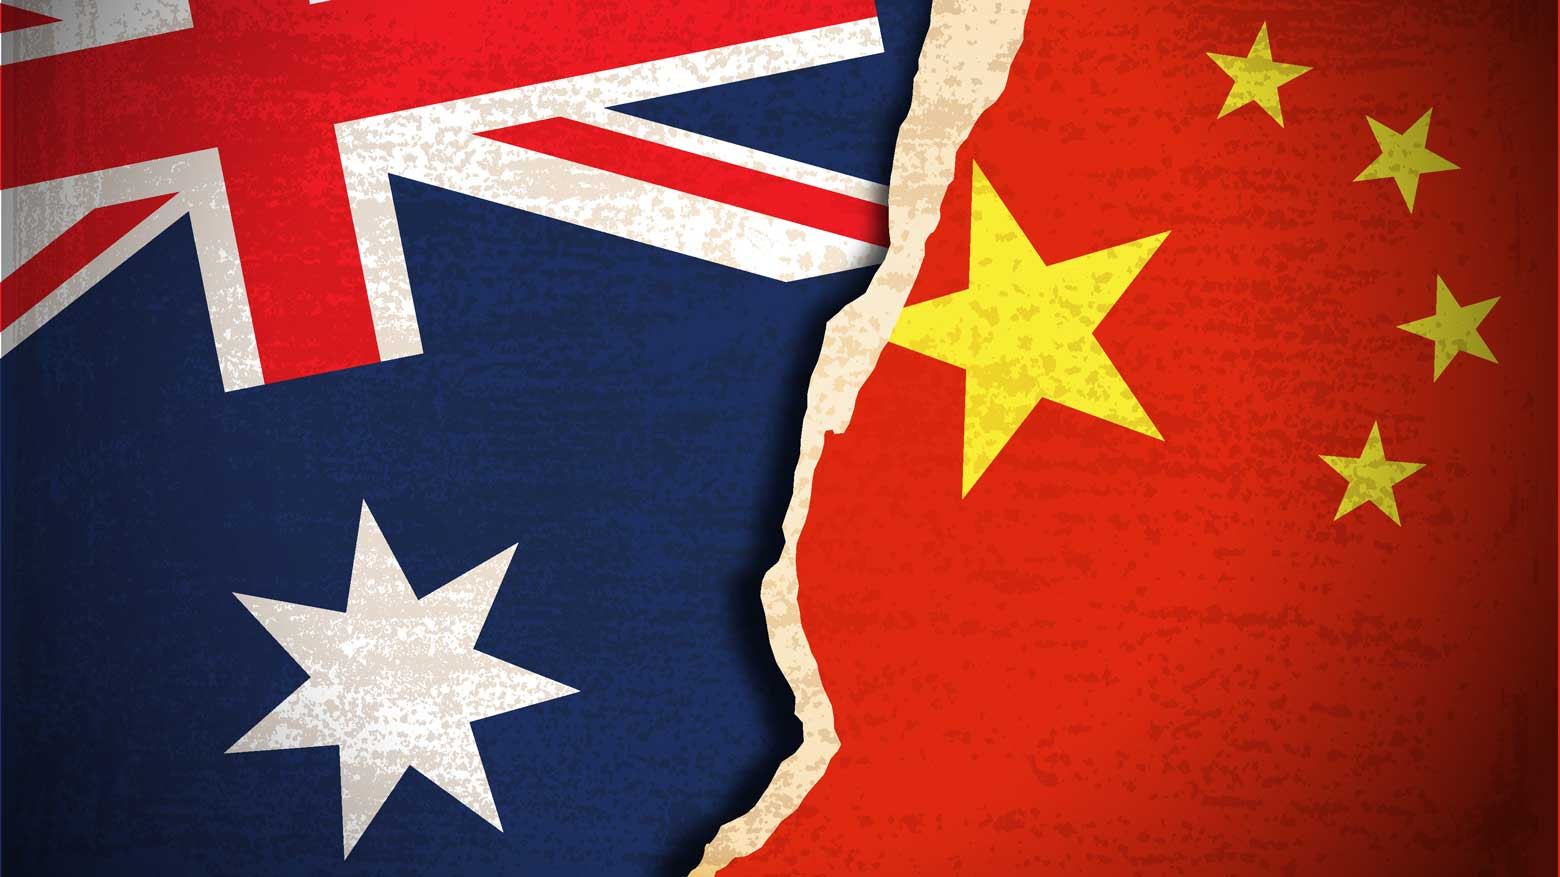 Trade tensions rise between China and Australia